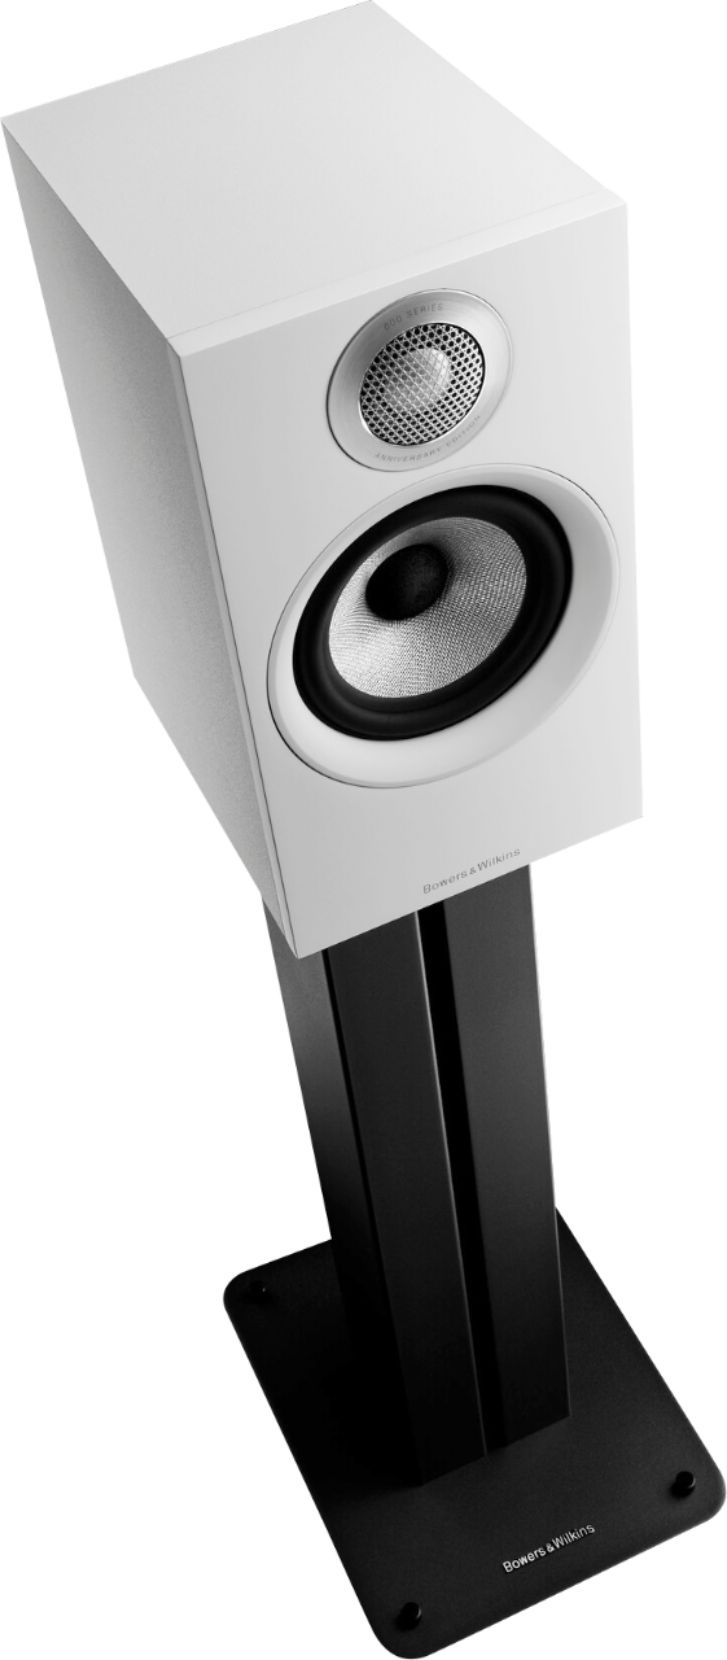 Only 60 Units Will Be Made of the New $899 Bowers & Wilkins